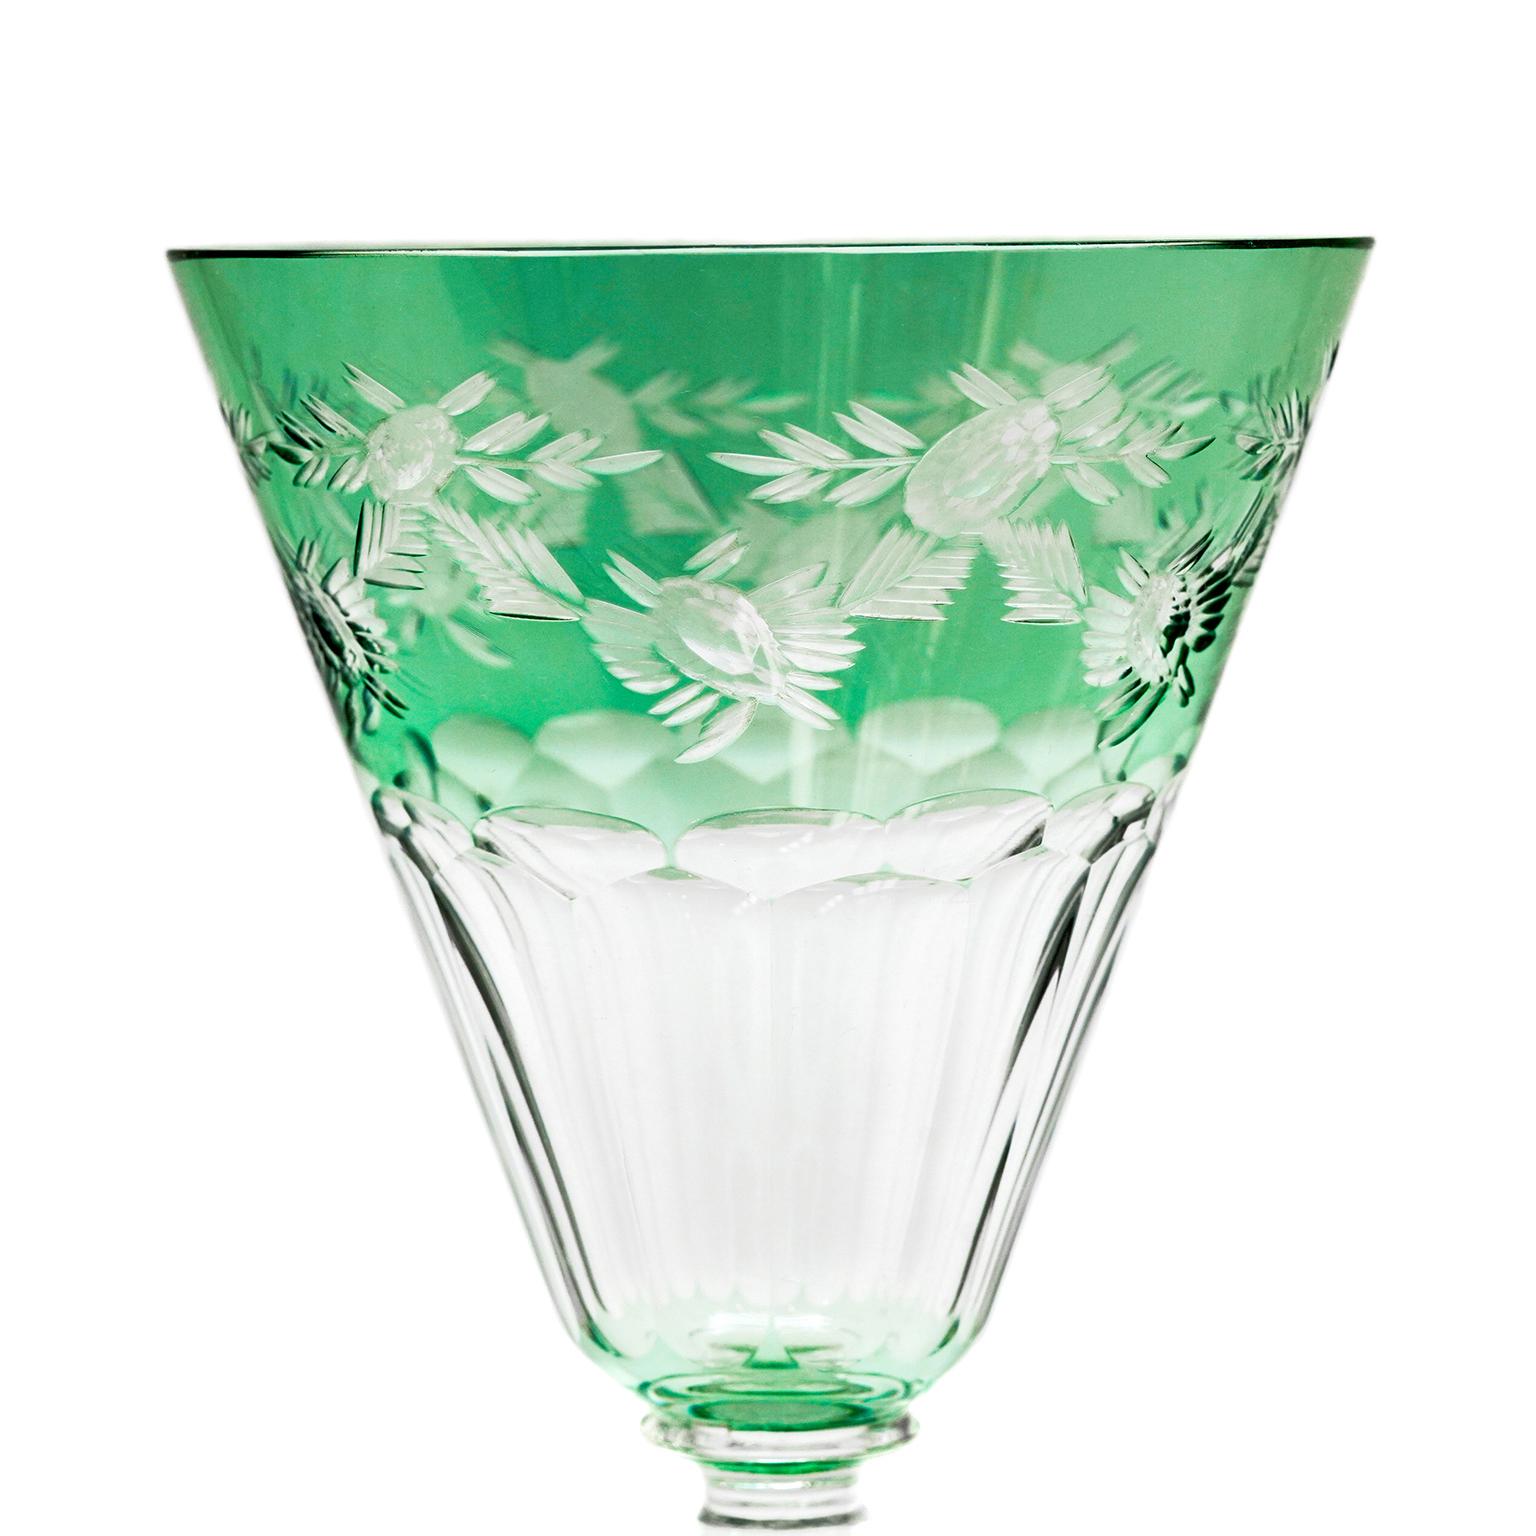 16 Green Cut Crystal Water Goblets by Sinclaire In Excellent Condition For Sale In Litchfield, CT